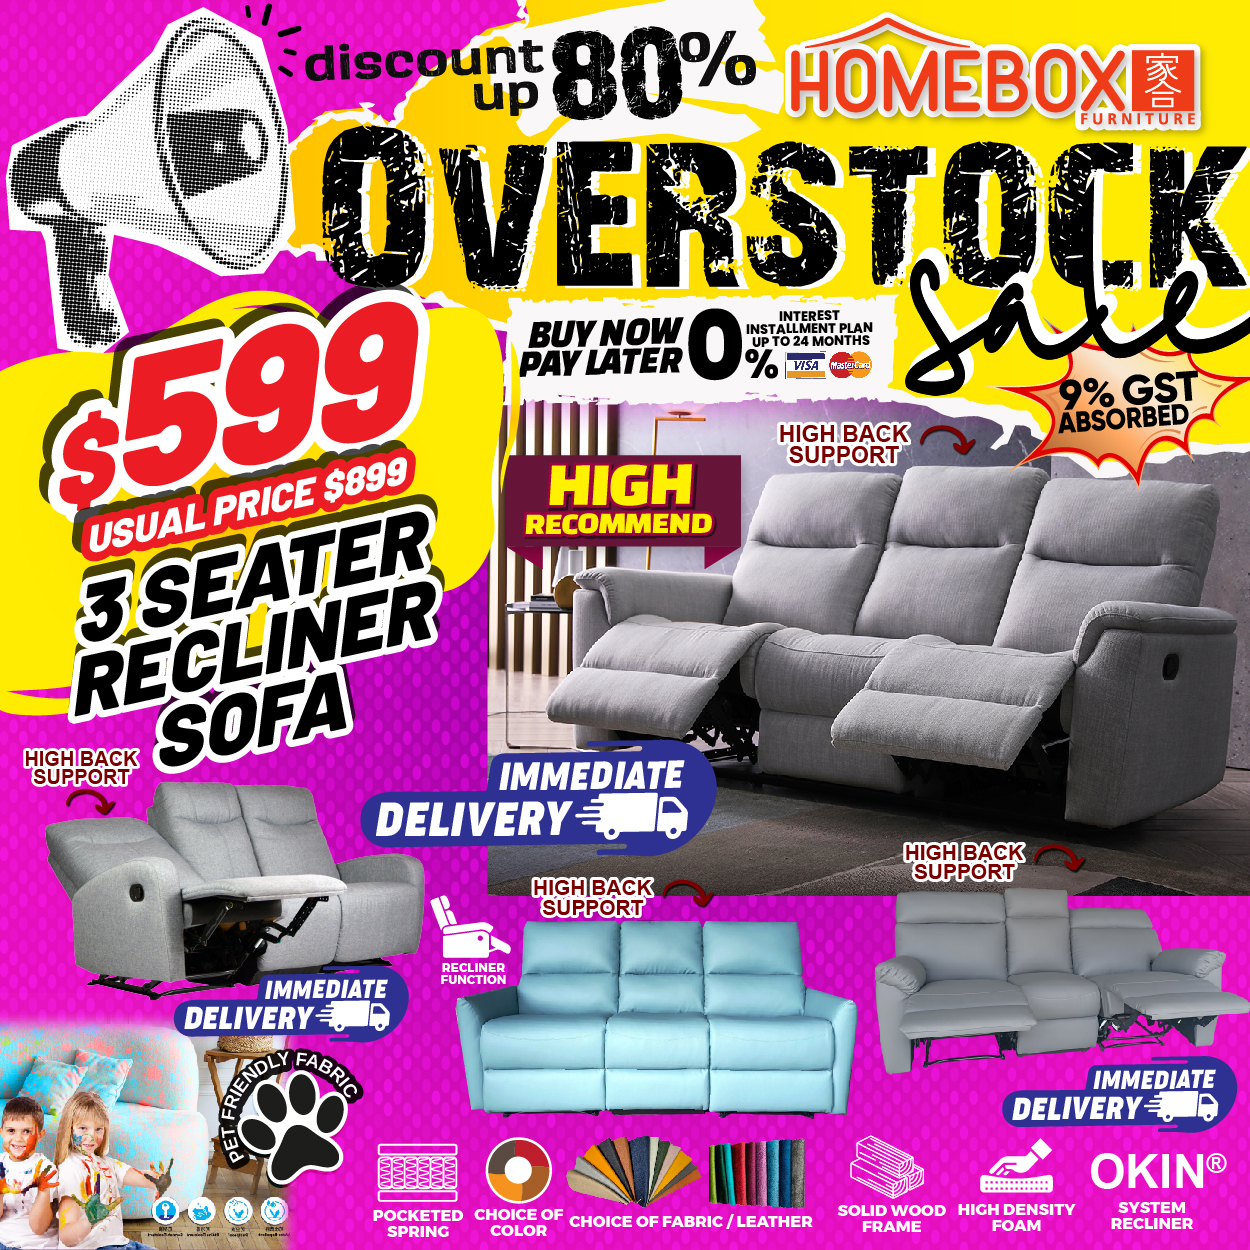 Lobang: Overstock sale at HOMEBOX Furniture @ Aljunied has furniture at up to 80% off from 17 Feb - 3 Mar 24 - 4